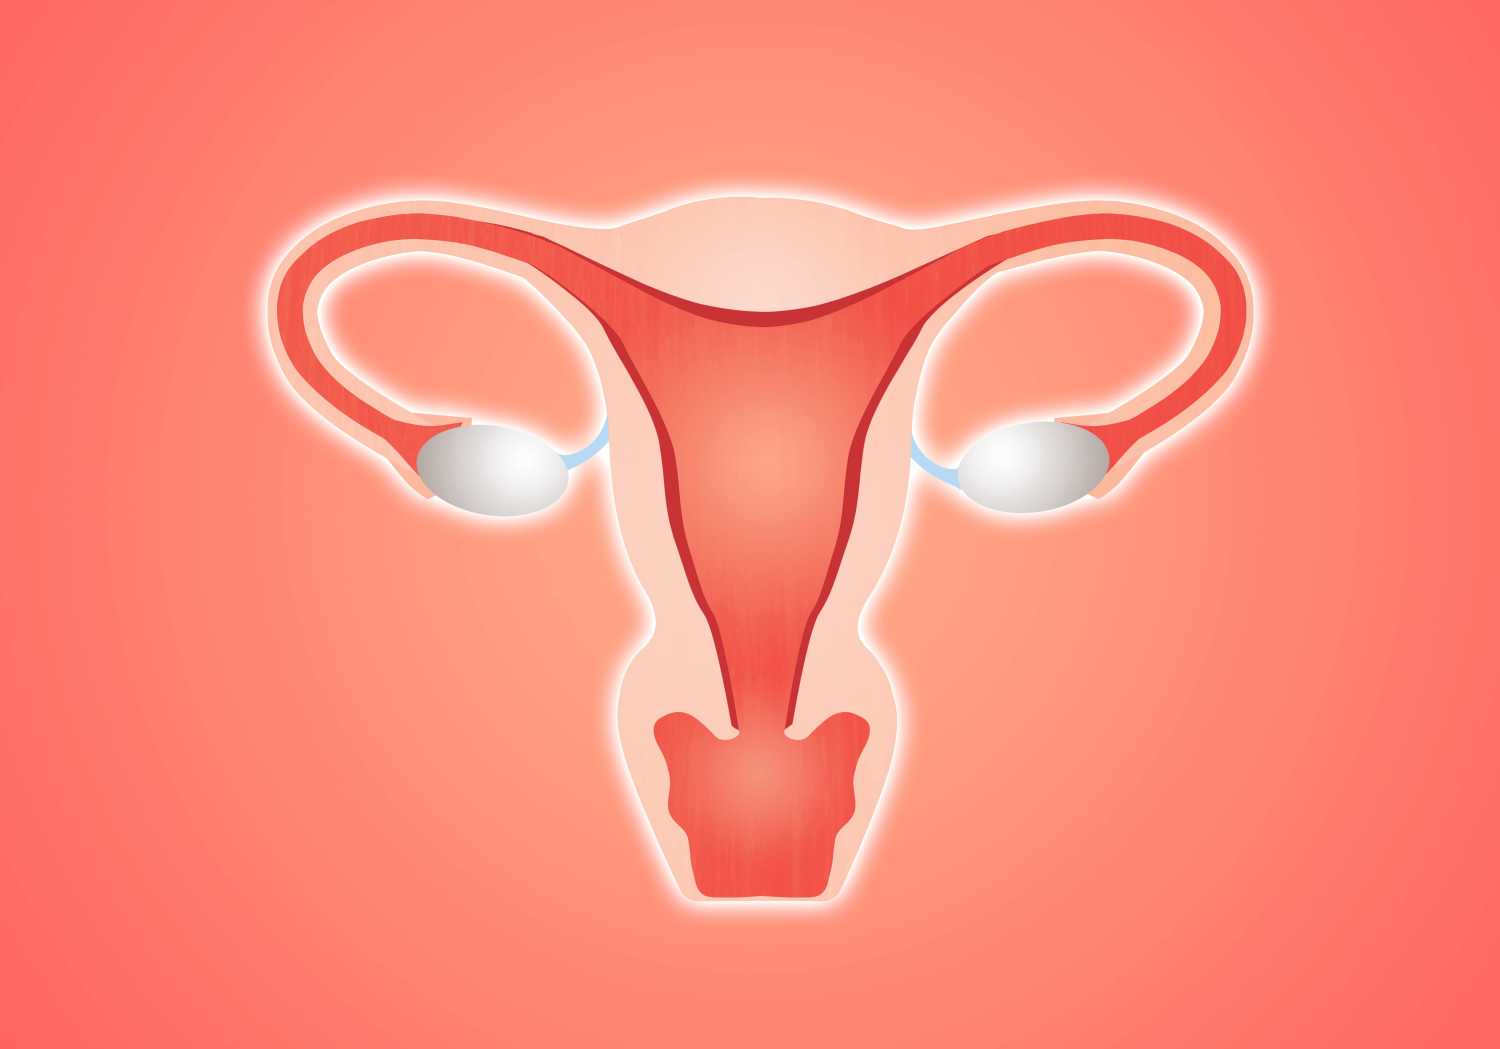 Illustration of female reproductive system against a light red background